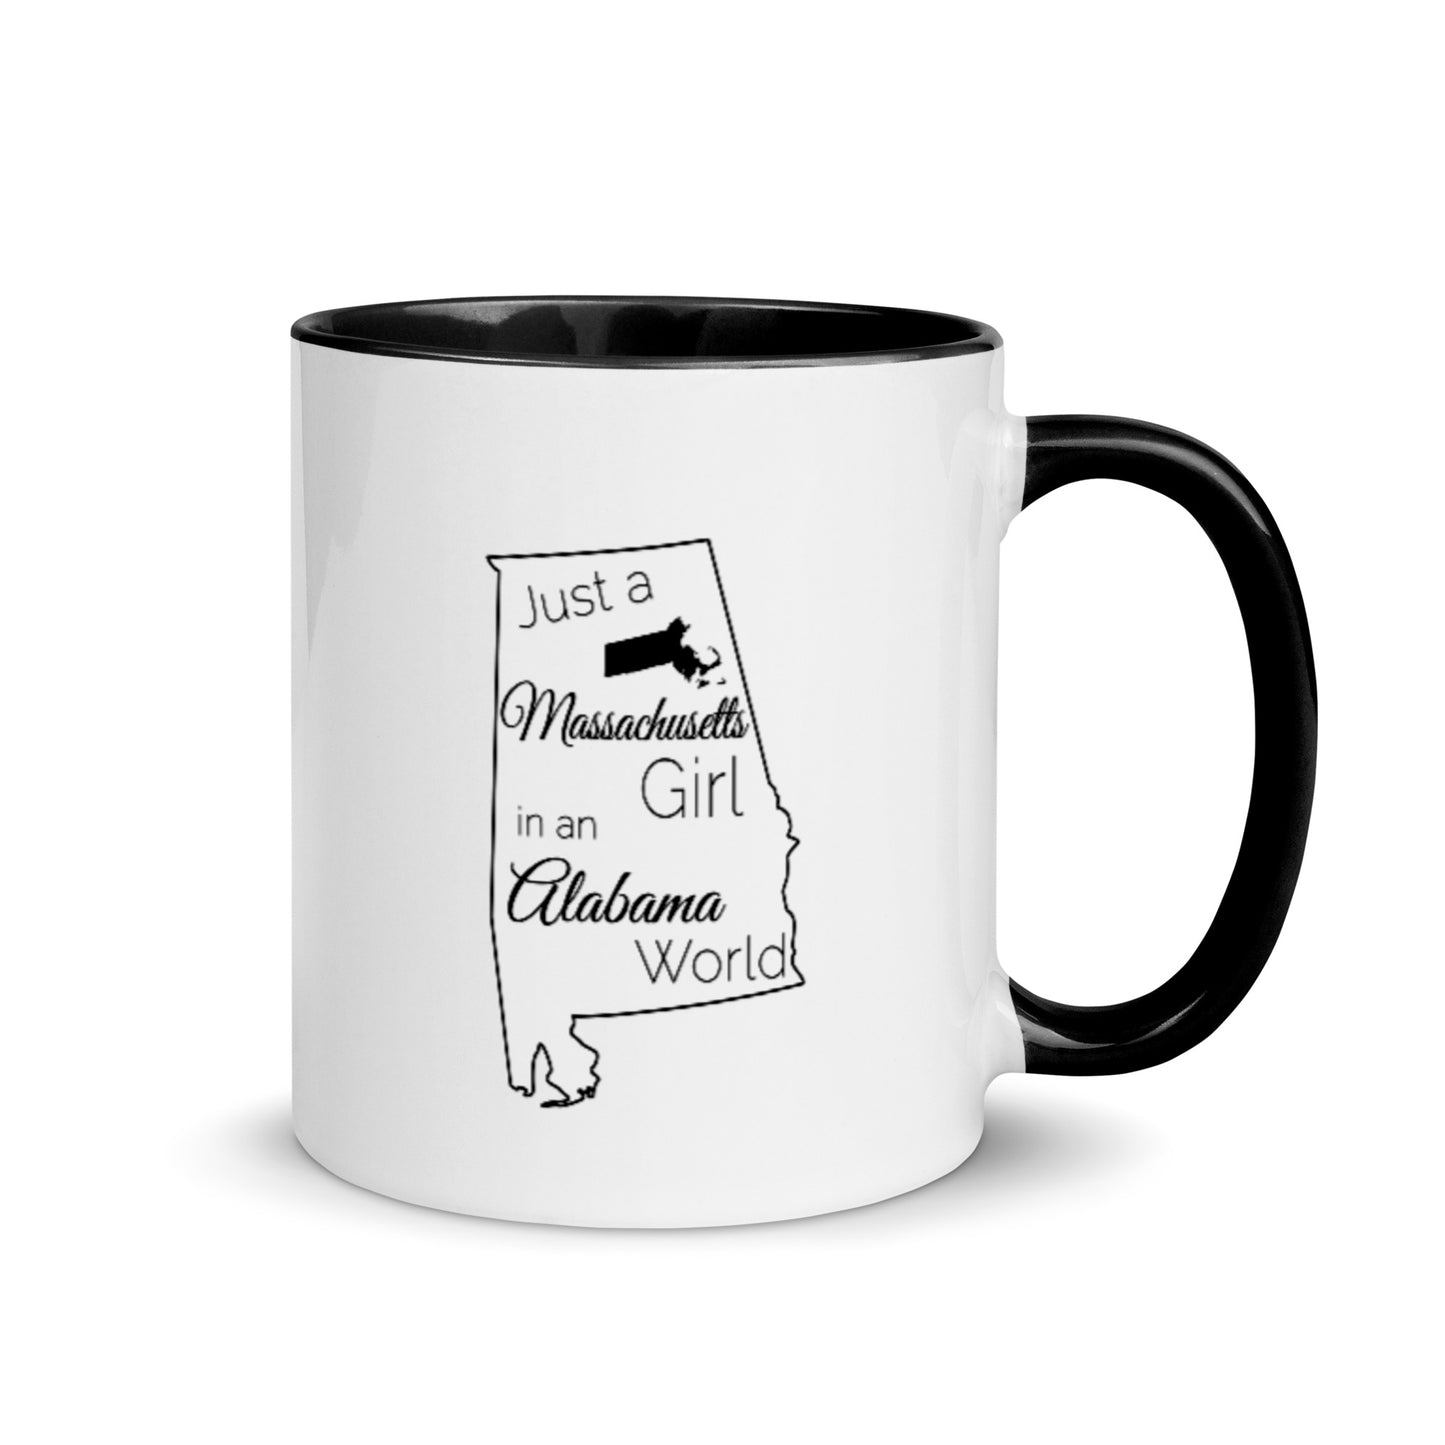 Just a Massachusetts Girl in an Alabama World Mug with Color Inside